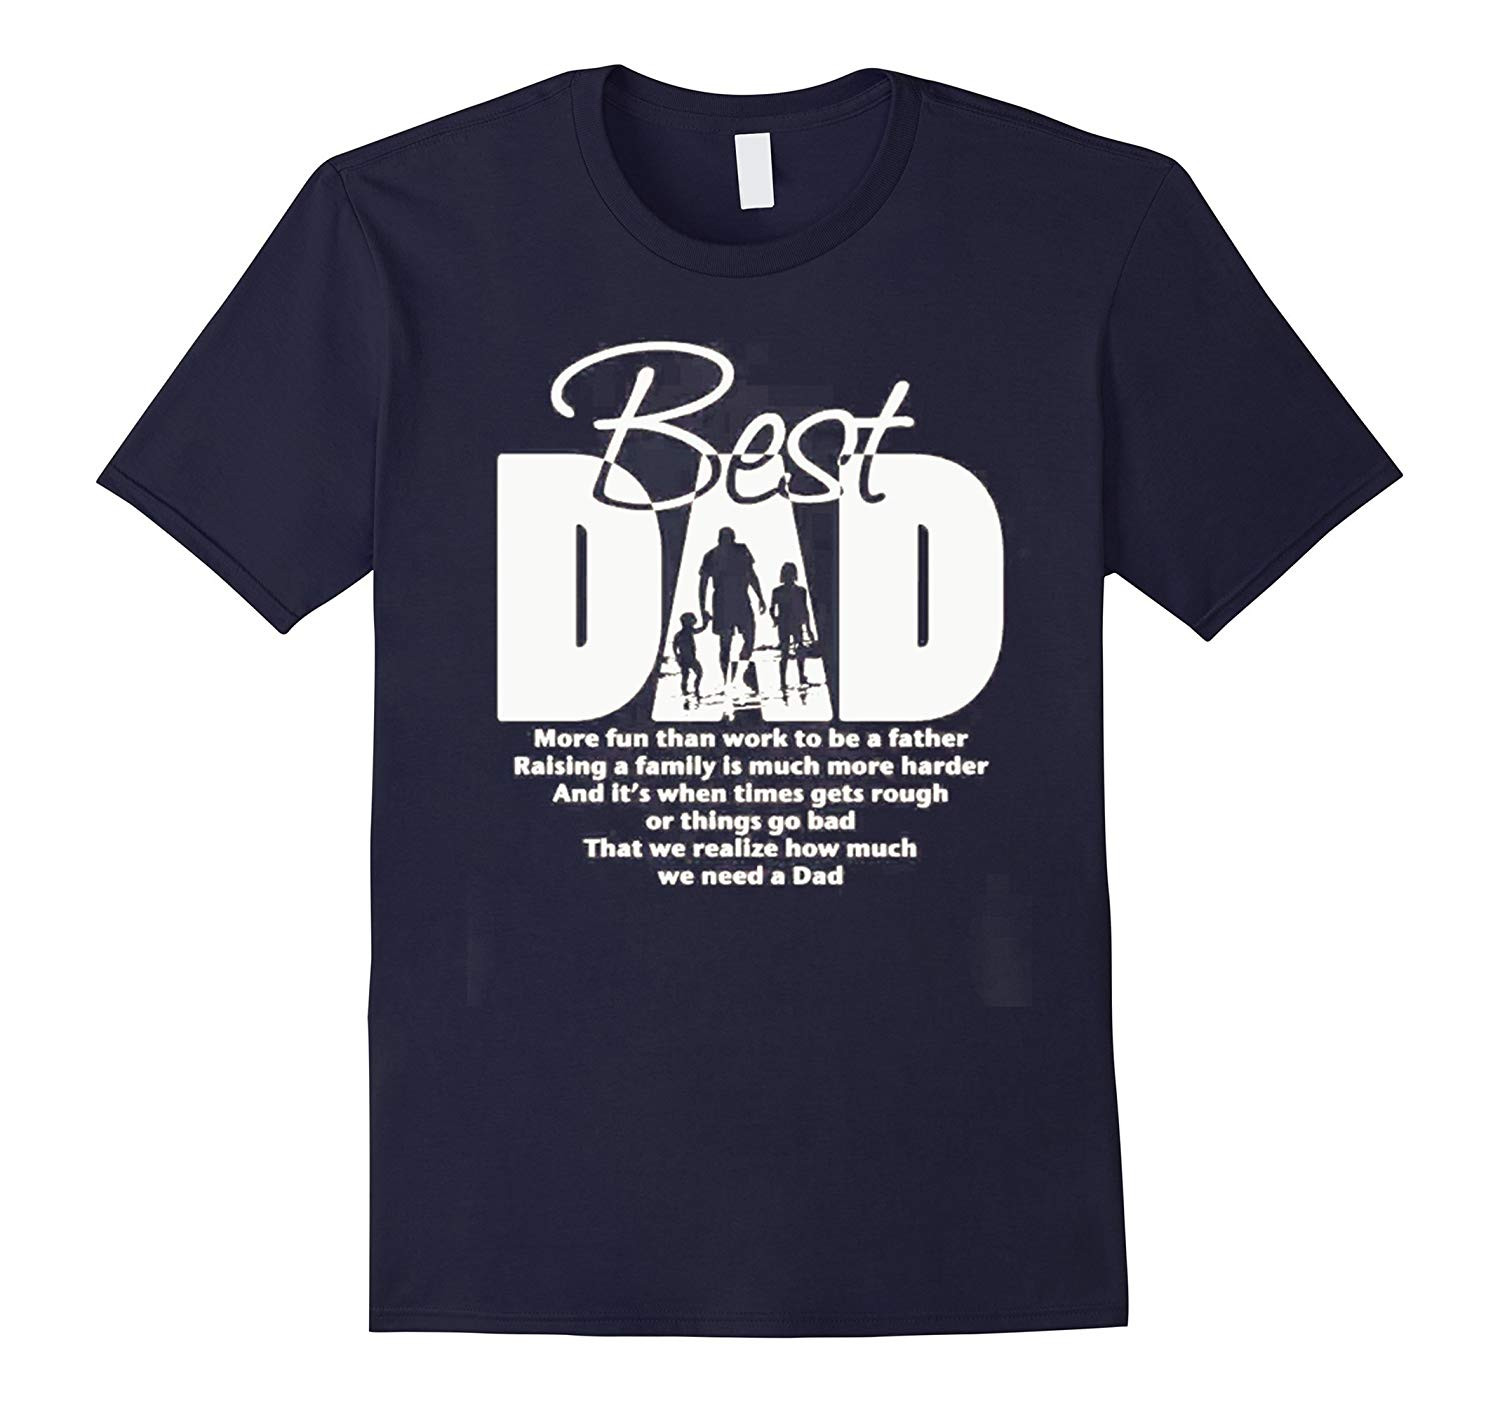 Fathers Day Shirt Ideas
 Best Dad T Shirt – Funny Fathers Day Gift Ideas For Dad CD